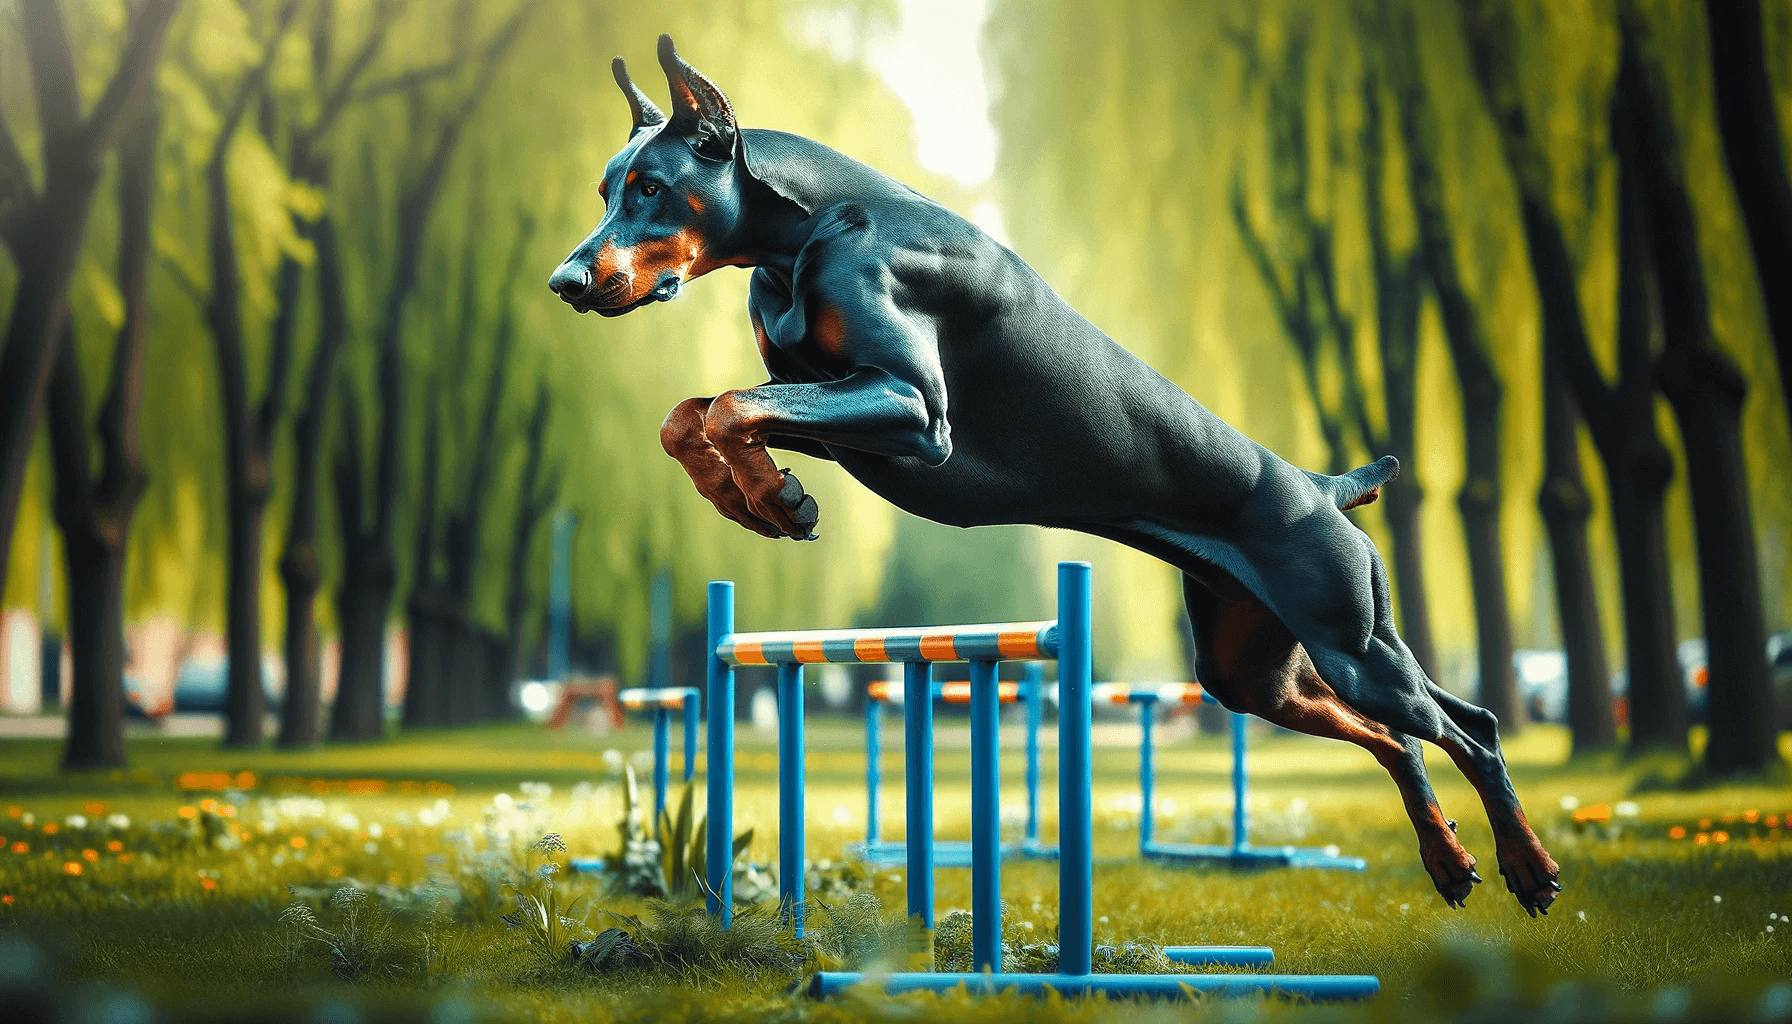 A Blue Doberman engaged in training, leaping over a hurdle in a park.